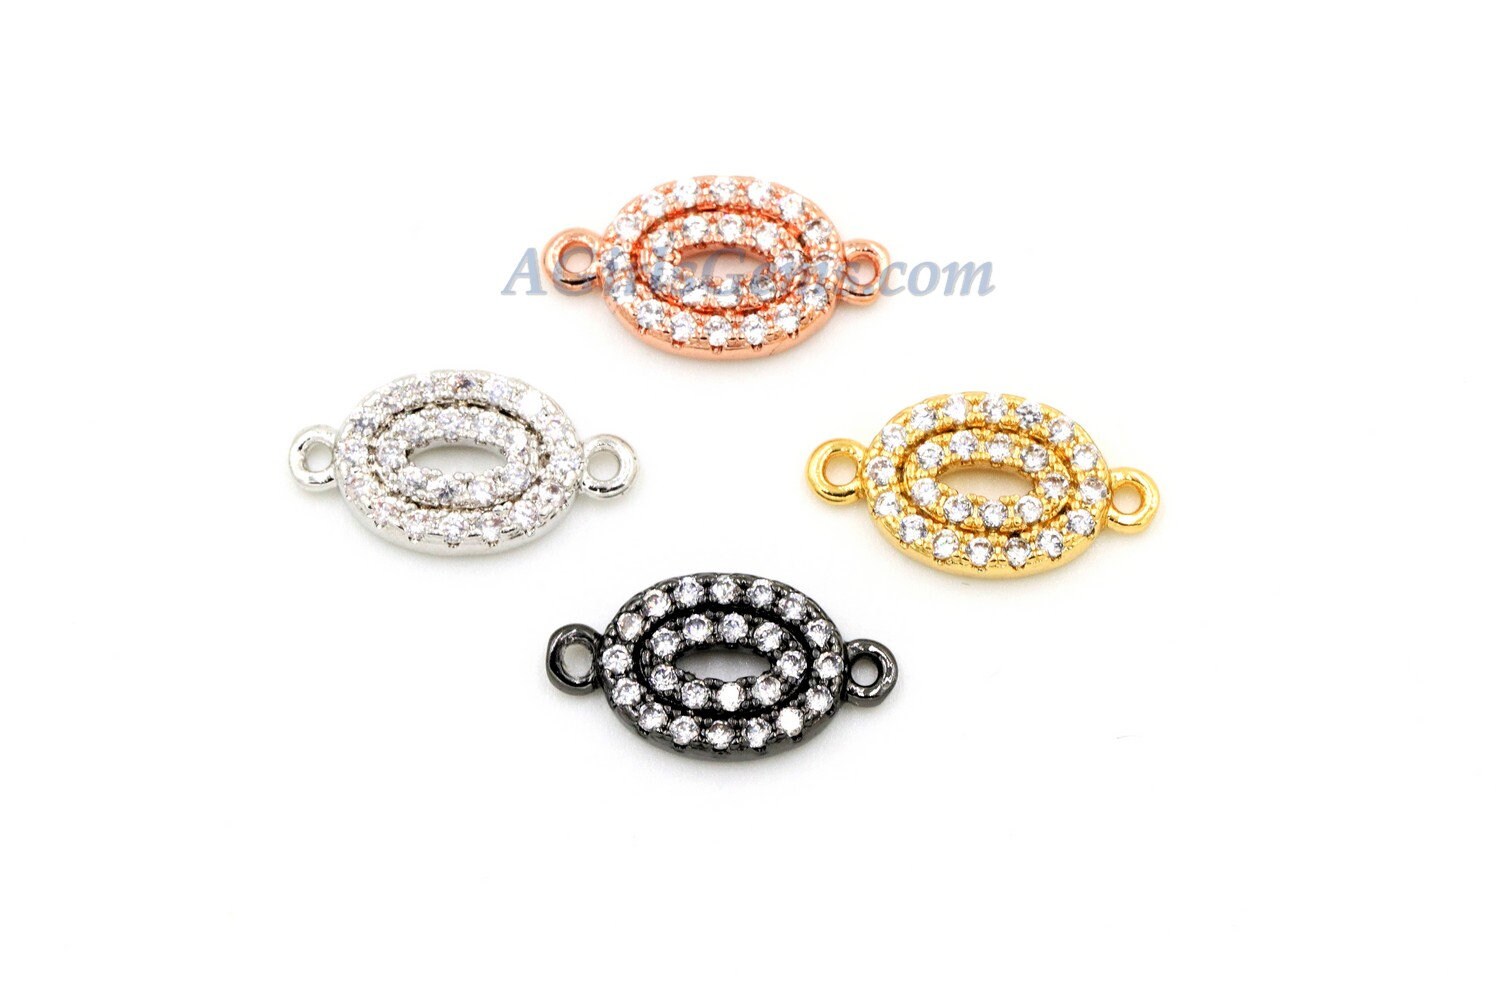 Oval Charms Connectors, 2 Pcs/Silver Rhodium Plated CZ Micro Pave Egg Bead Oval Bracelet Connector 7 x 13 mm, Egg Bead Necklace Charms